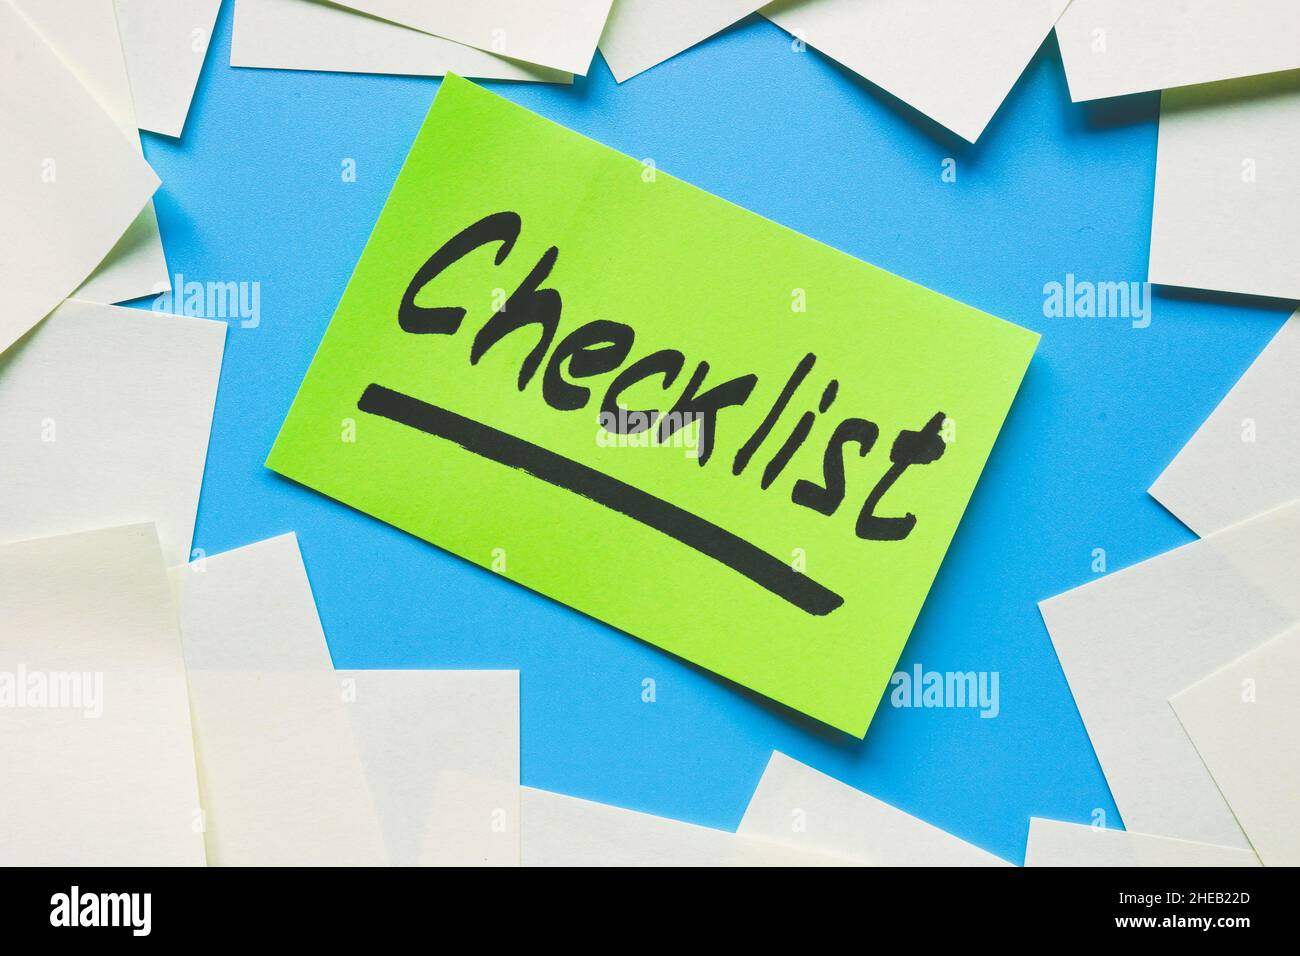 Written word Checklist on the sticker and empty stickers. Stock Photo